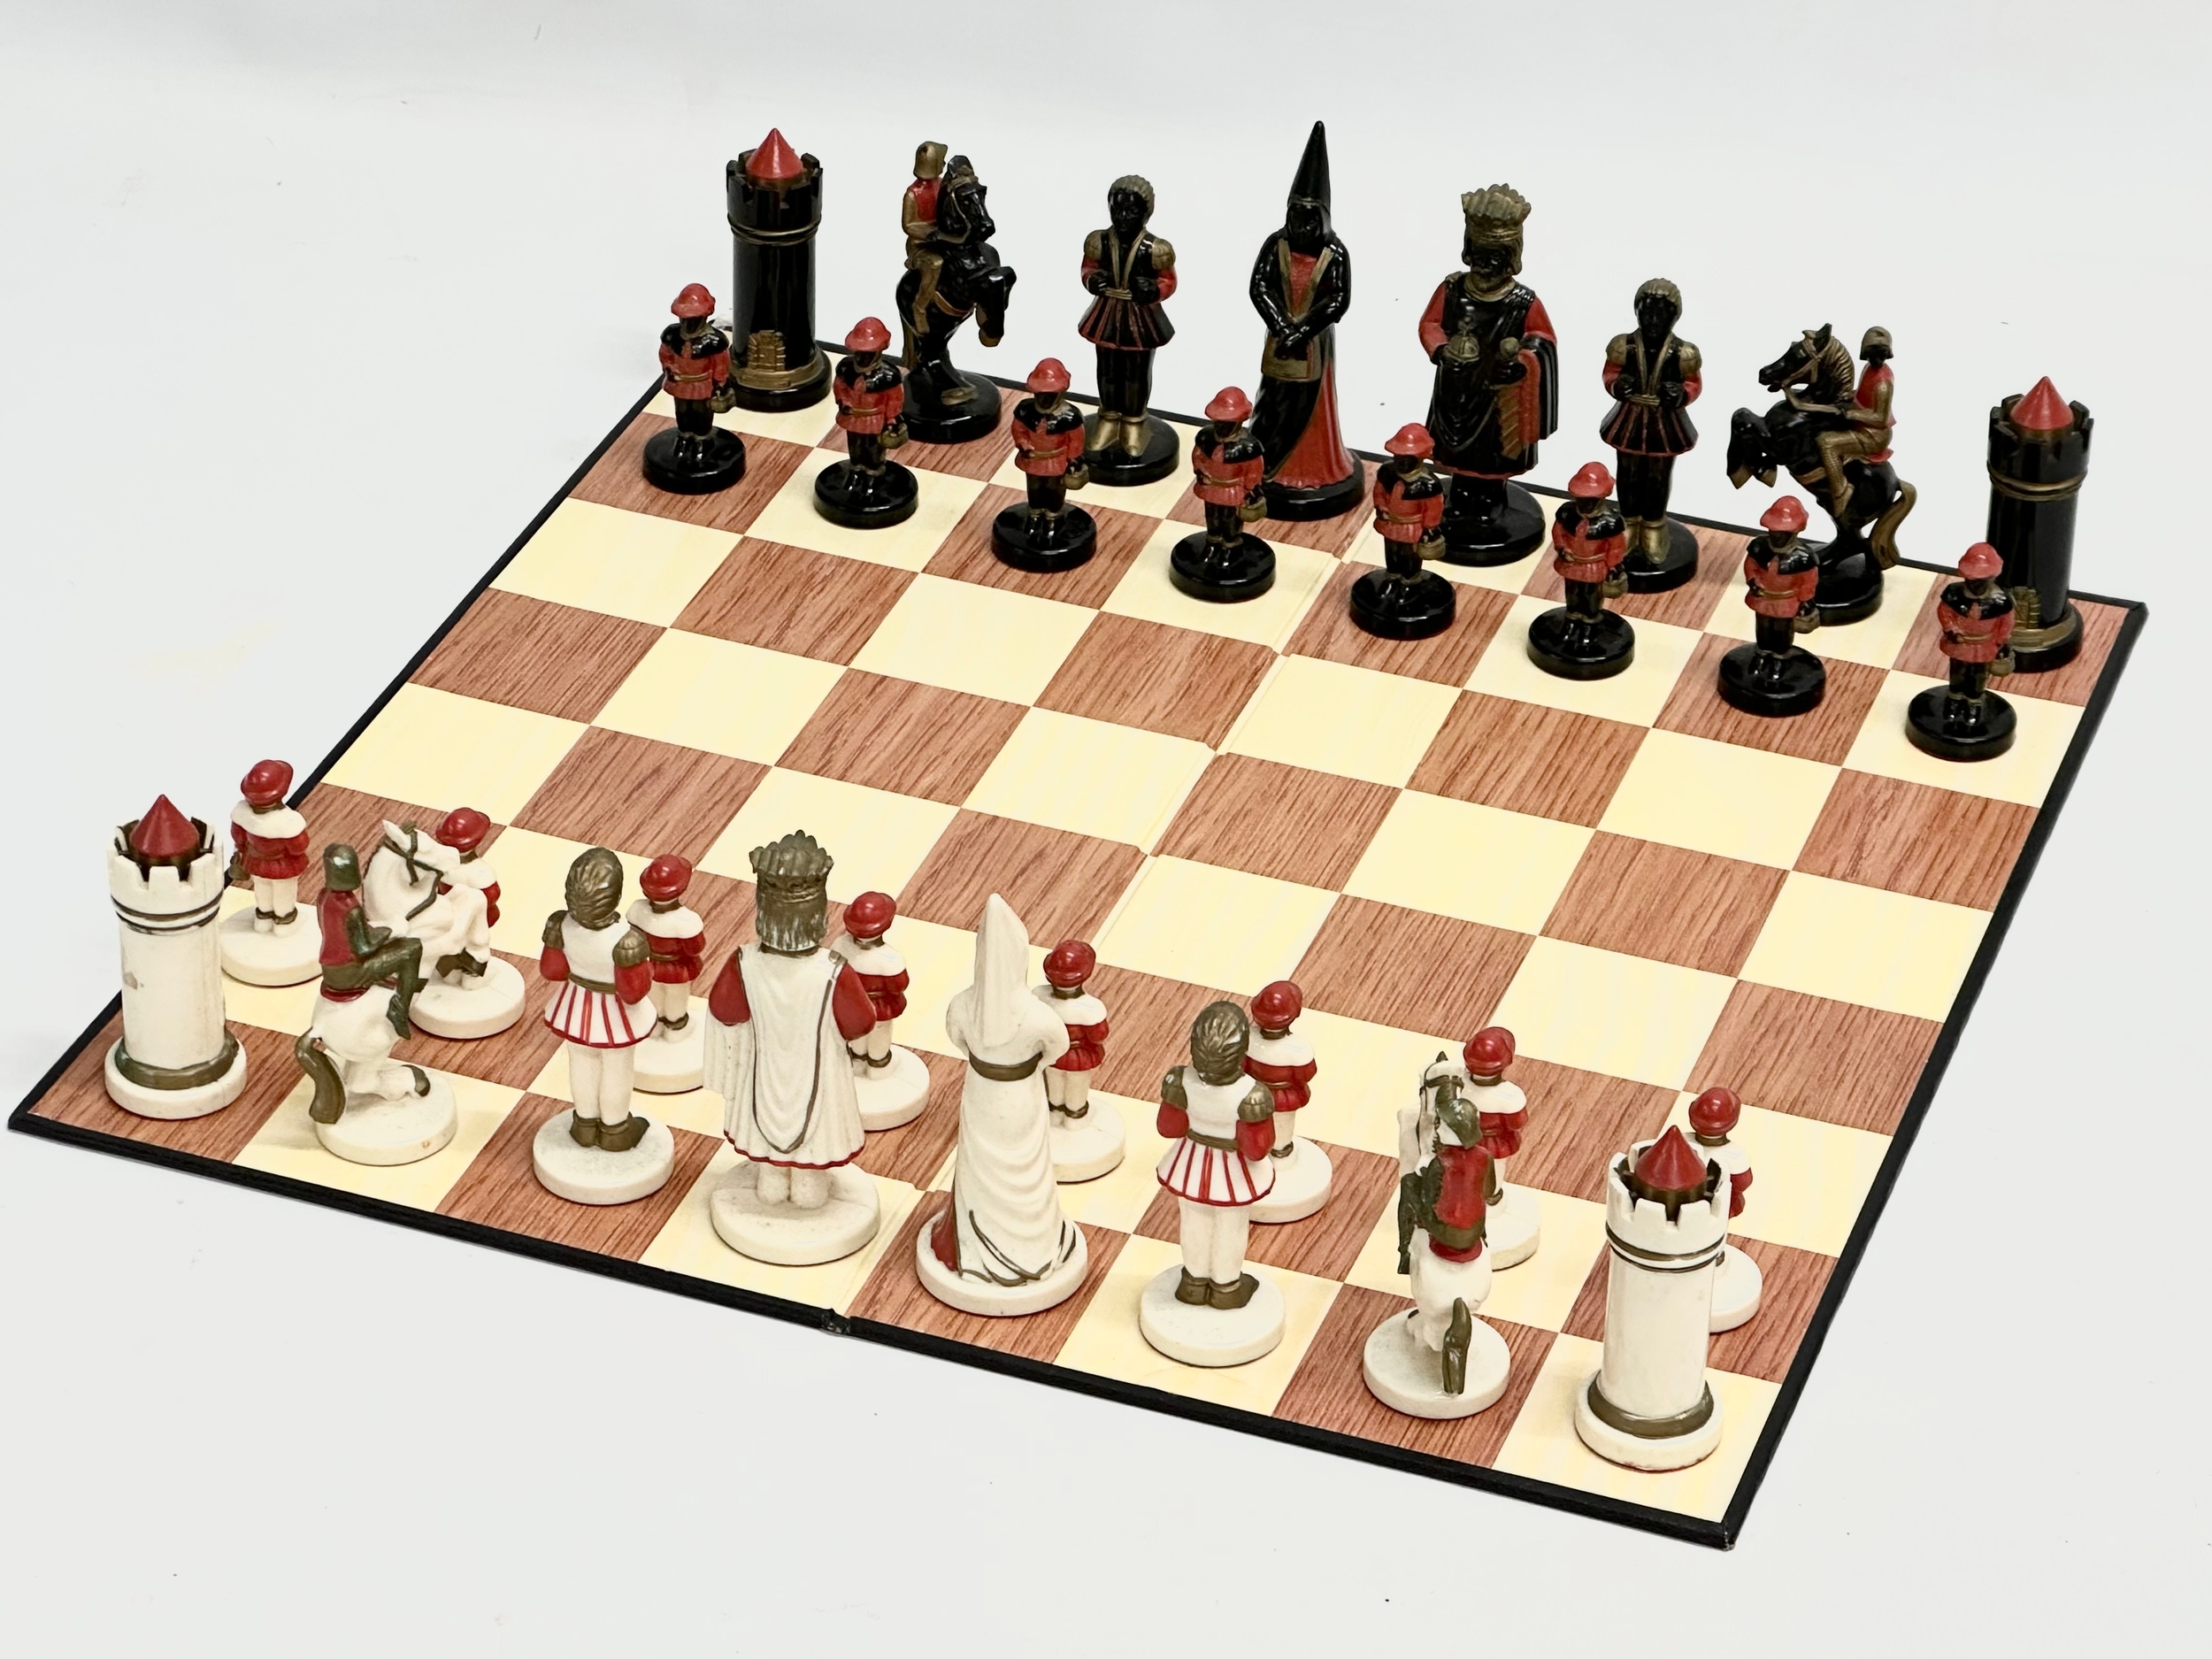 A medieval style chess set. 38x38cm